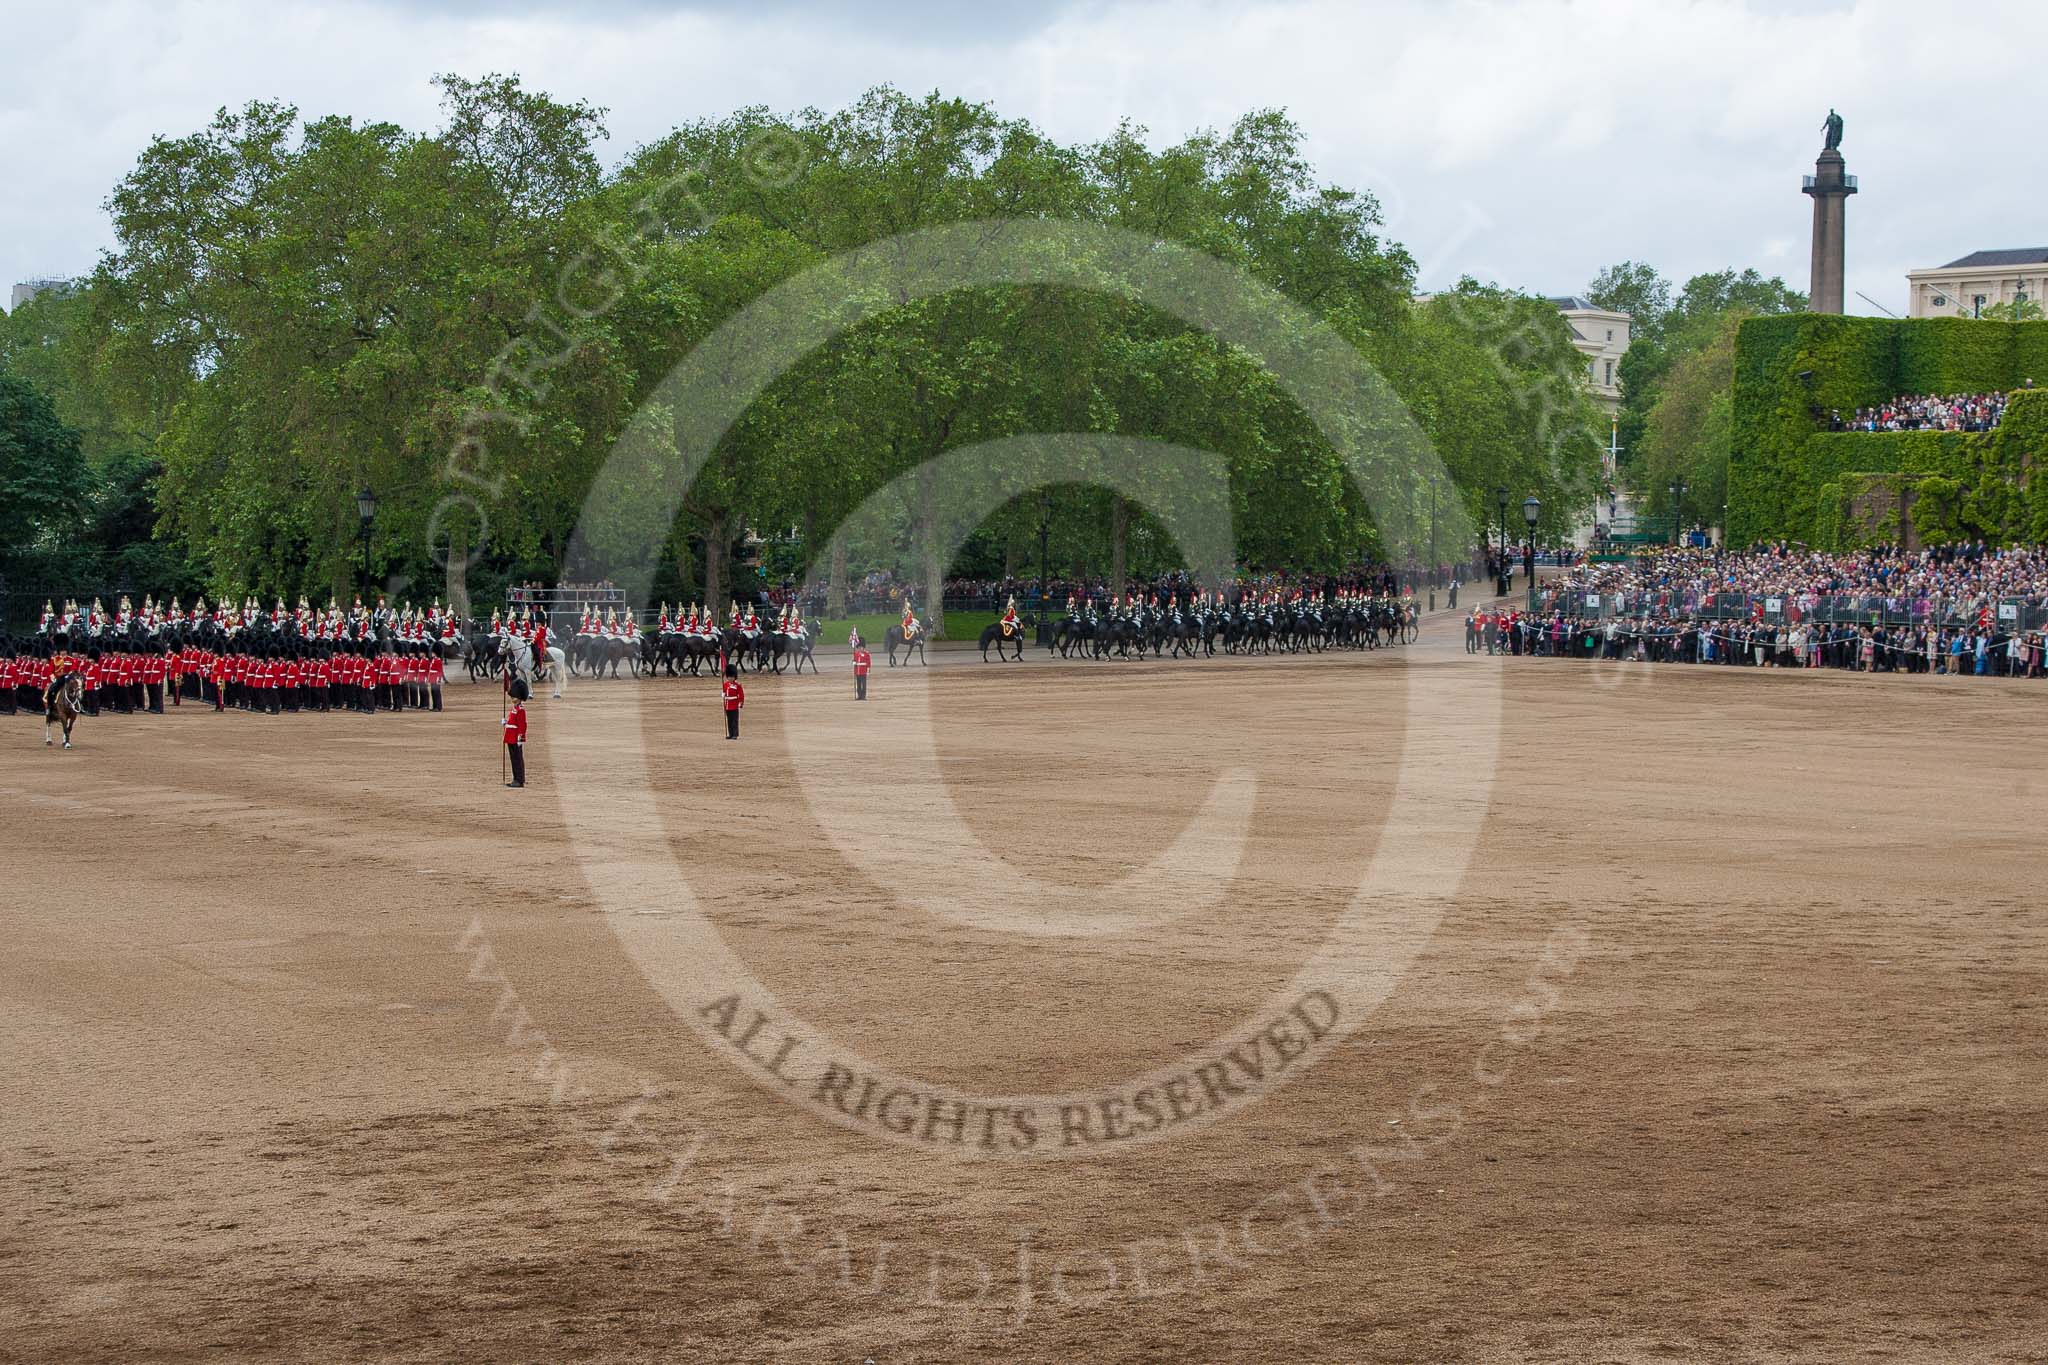 Trooping the Colour 2012: Ready for the March Off - The Blues and Royals are riding towards the access road to The Mall, The Life Guards are starting to follow..
Horse Guards Parade, Westminster,
London SW1,

United Kingdom,
on 16 June 2012 at 12:07, image #631